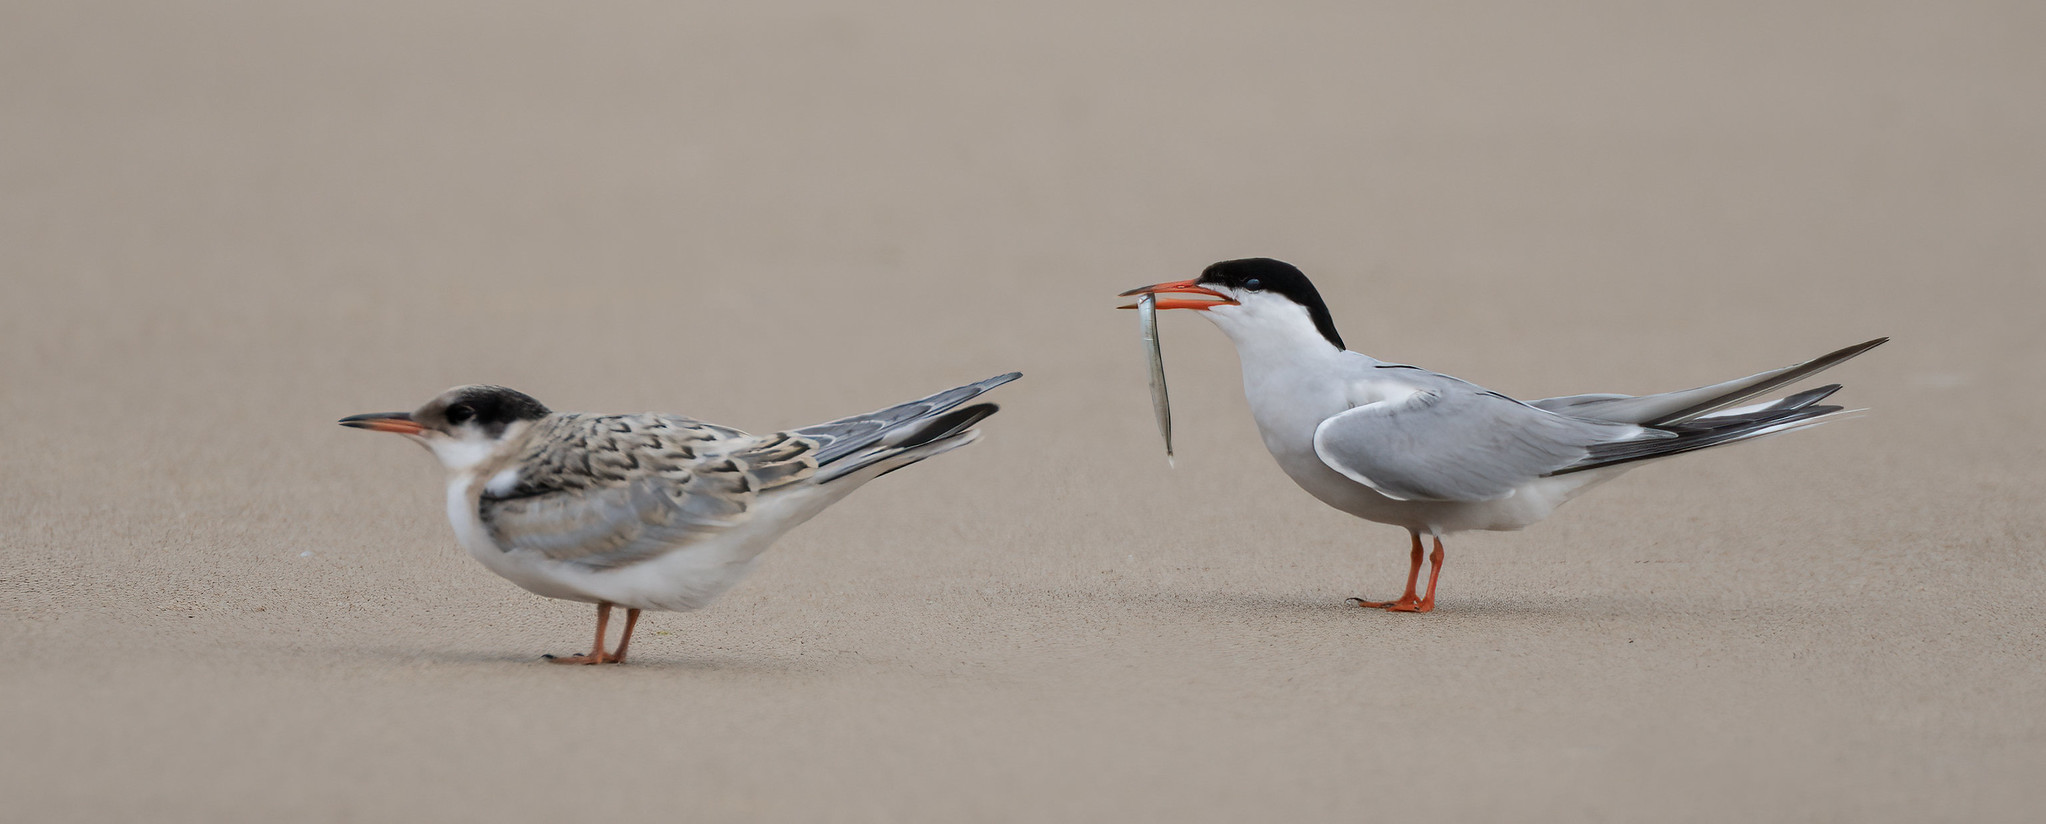 Common Tern.....Well, do you want this fish or not?